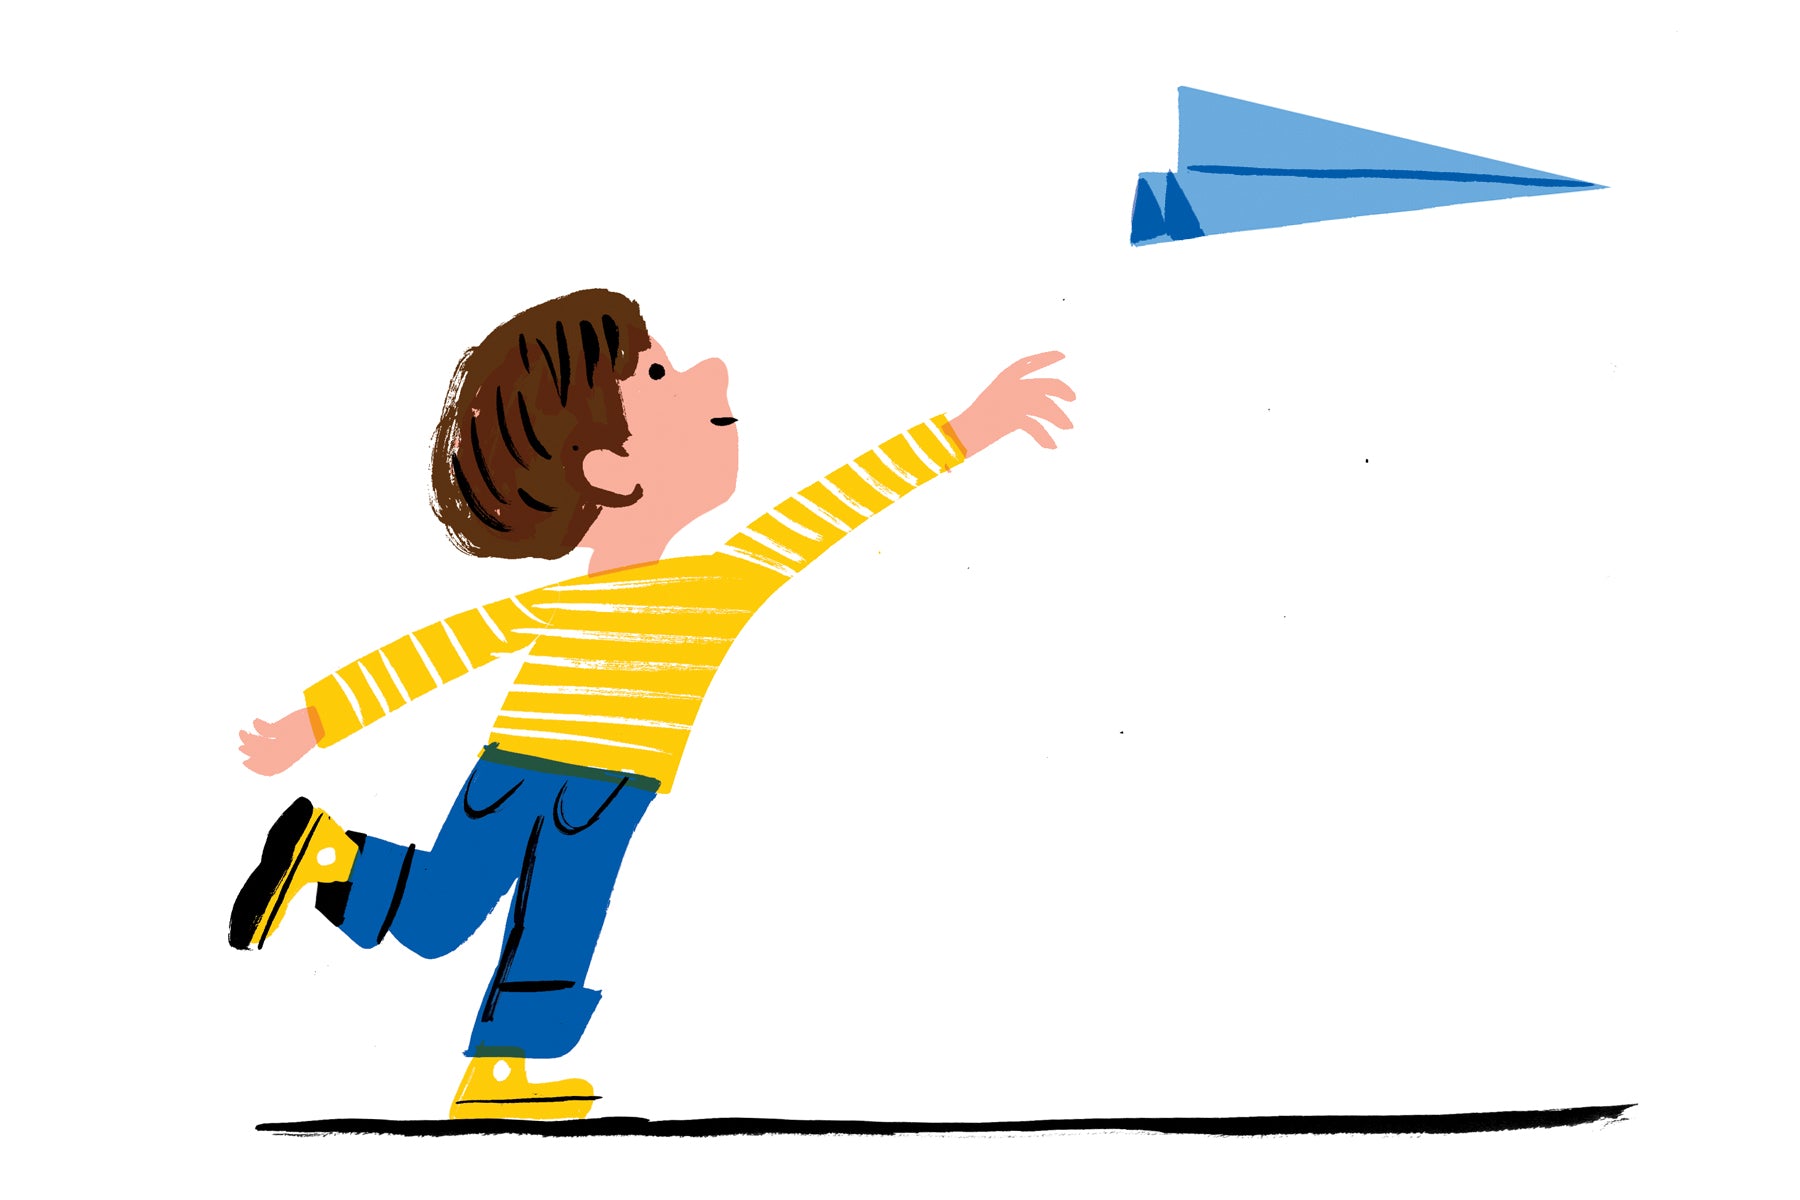 Illustration of a young child flying a paper airplane